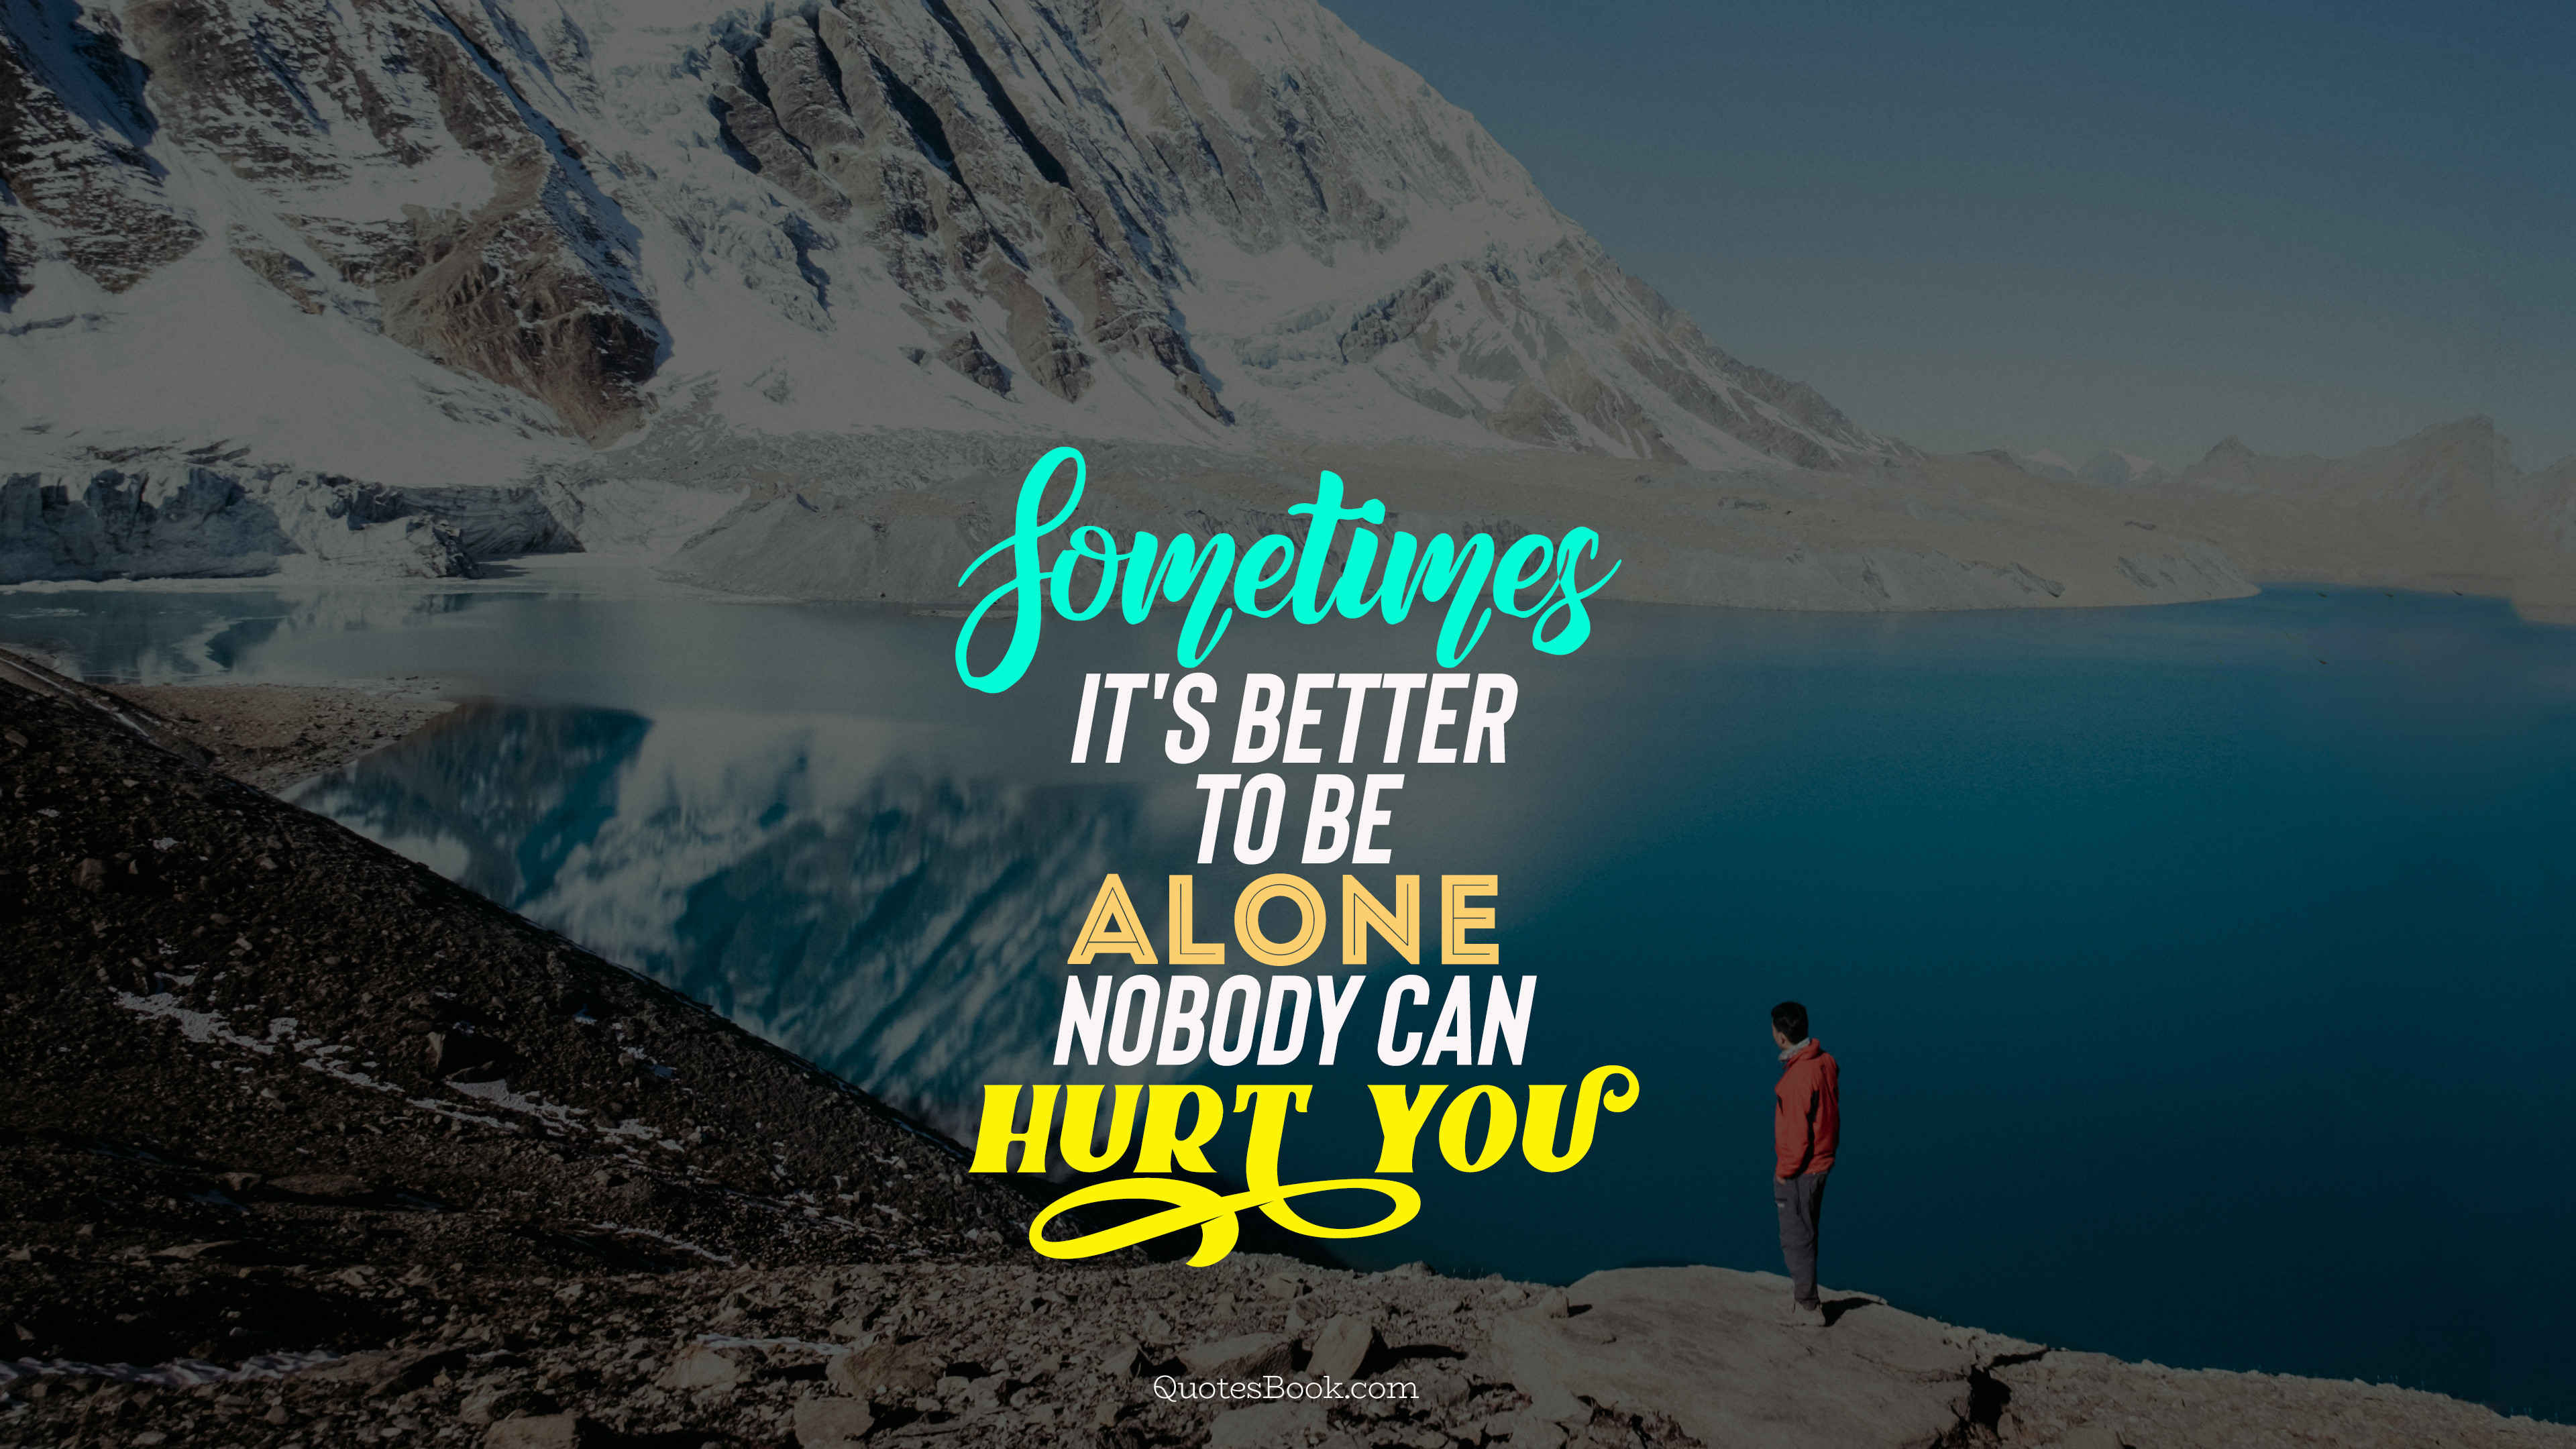 Sometimes it's better to be alone nobody can hurt you - QuotesBook